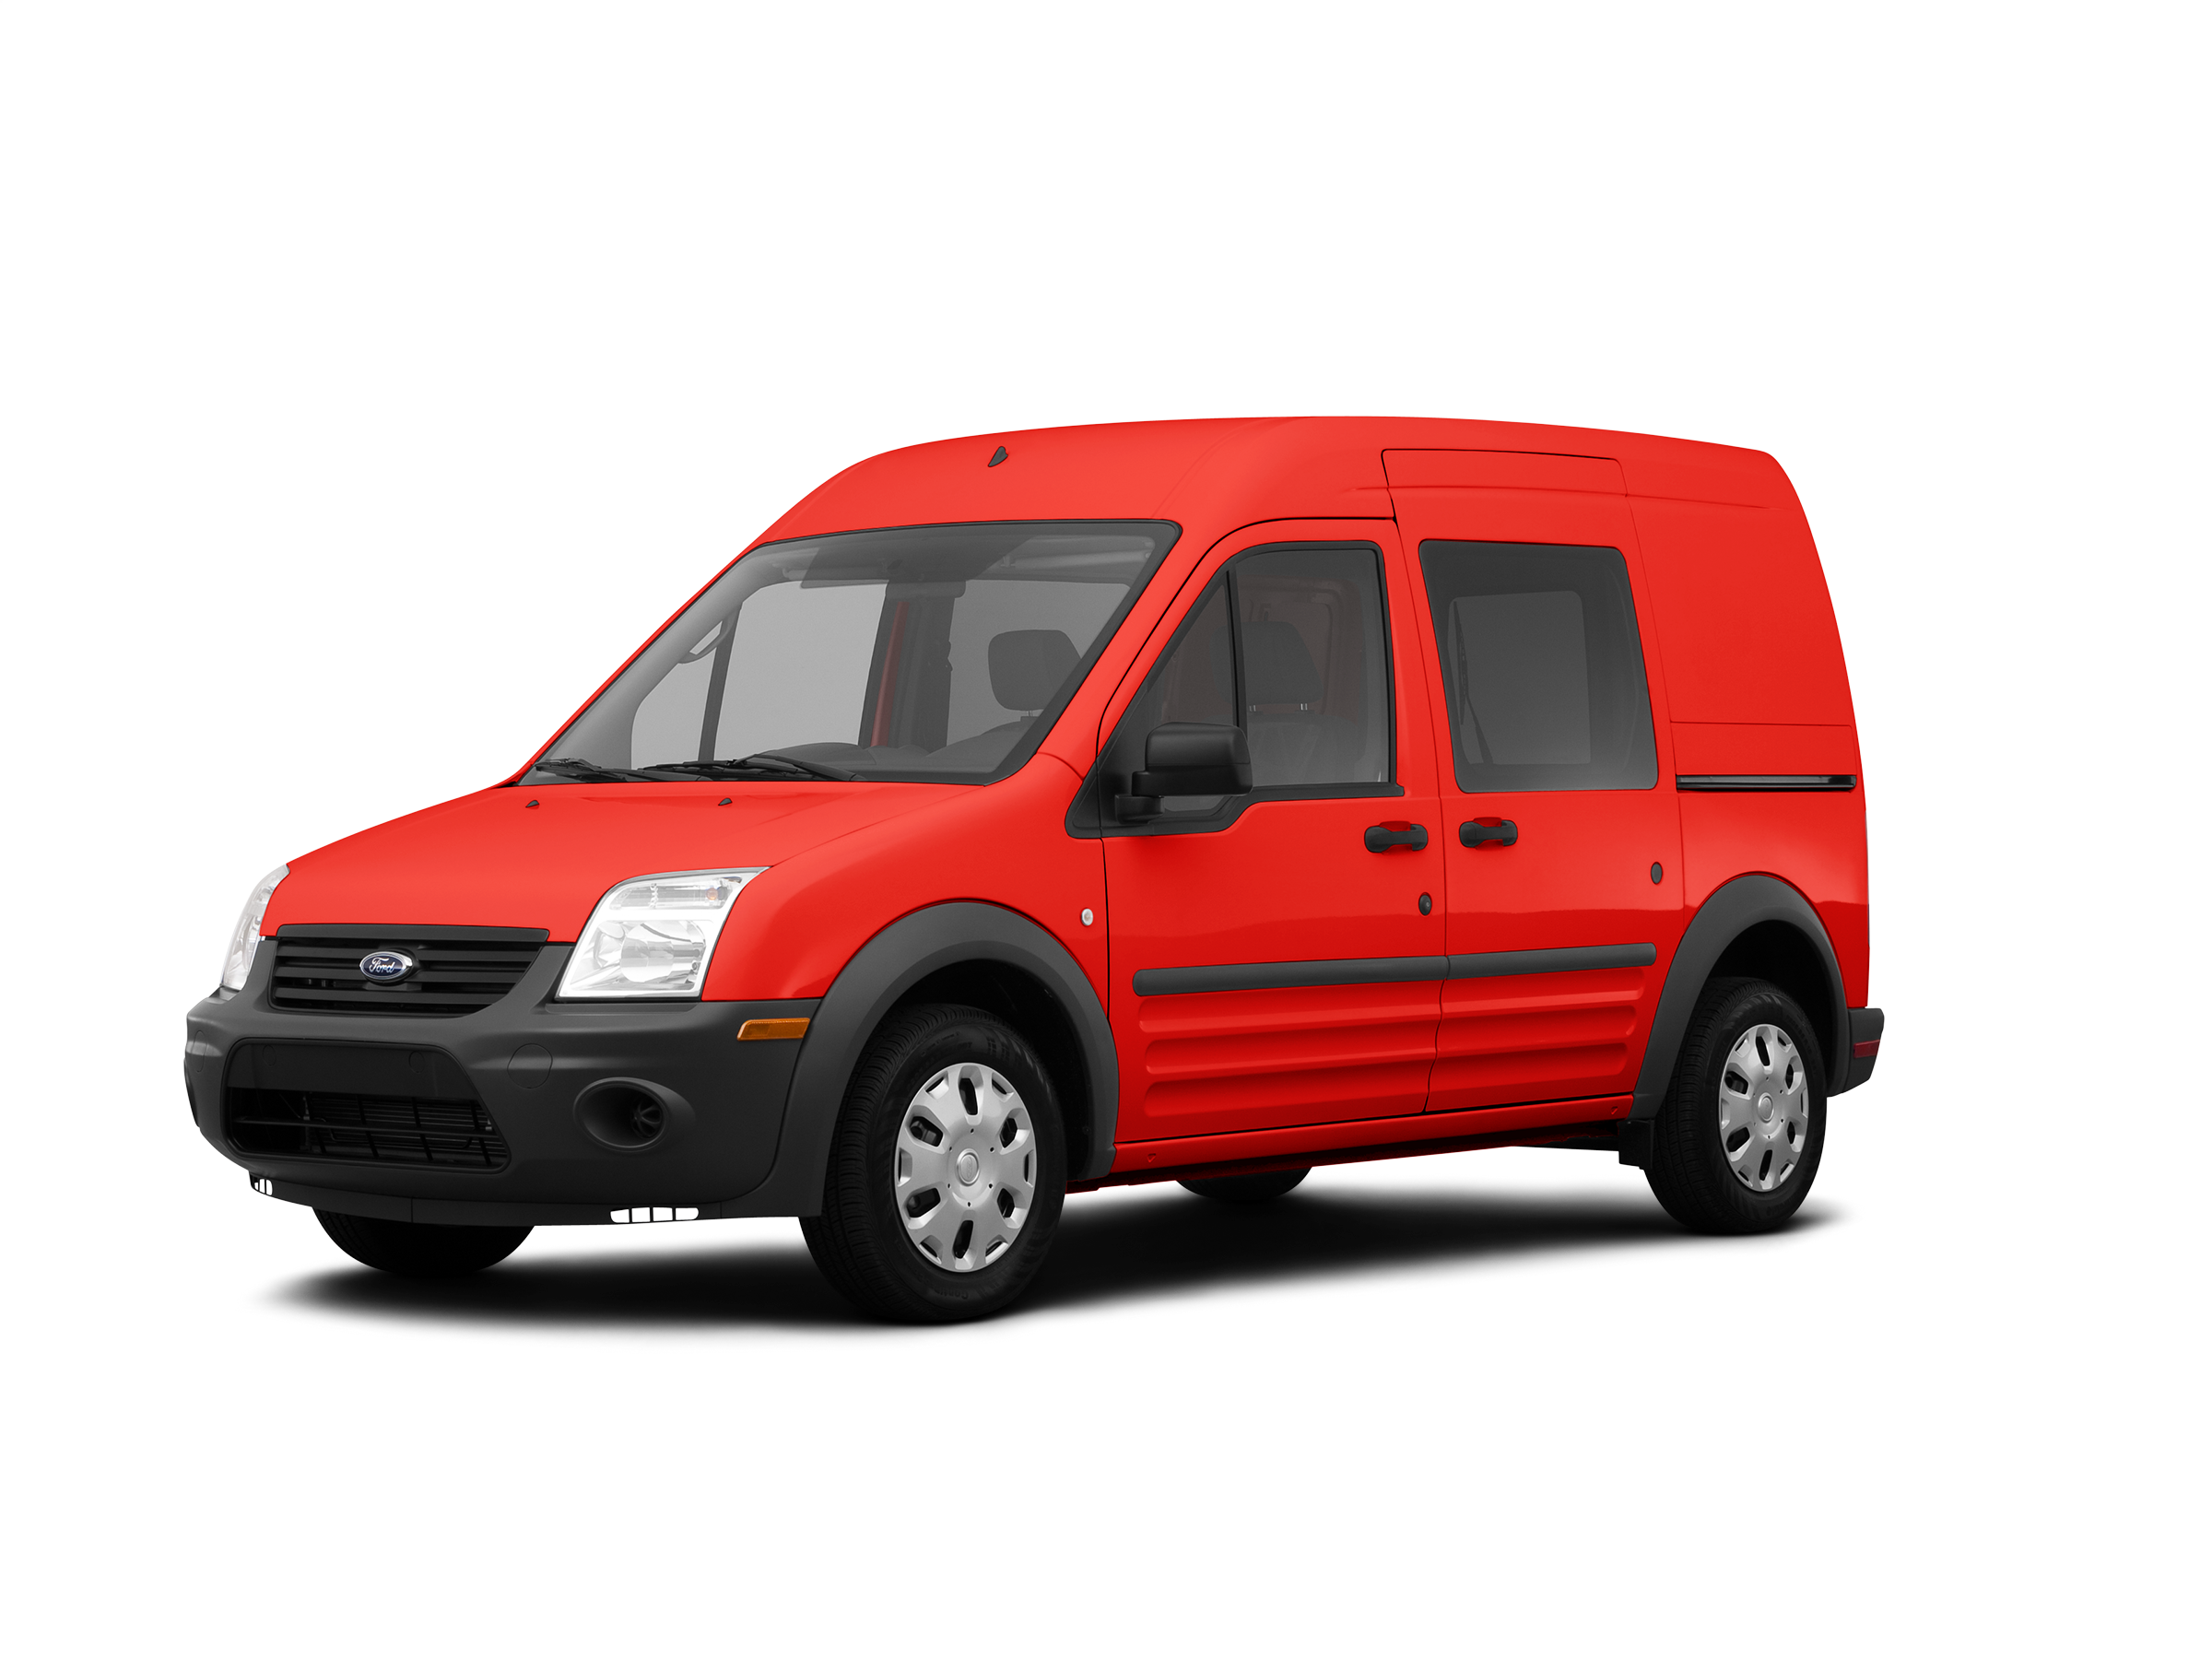 https://file.kelleybluebookimages.com/kbb/base/evox/CP/8665/2013-Ford-Transit%20Connect%20Cargo-front_8665_032_2400x1800_PQ_nologo.png